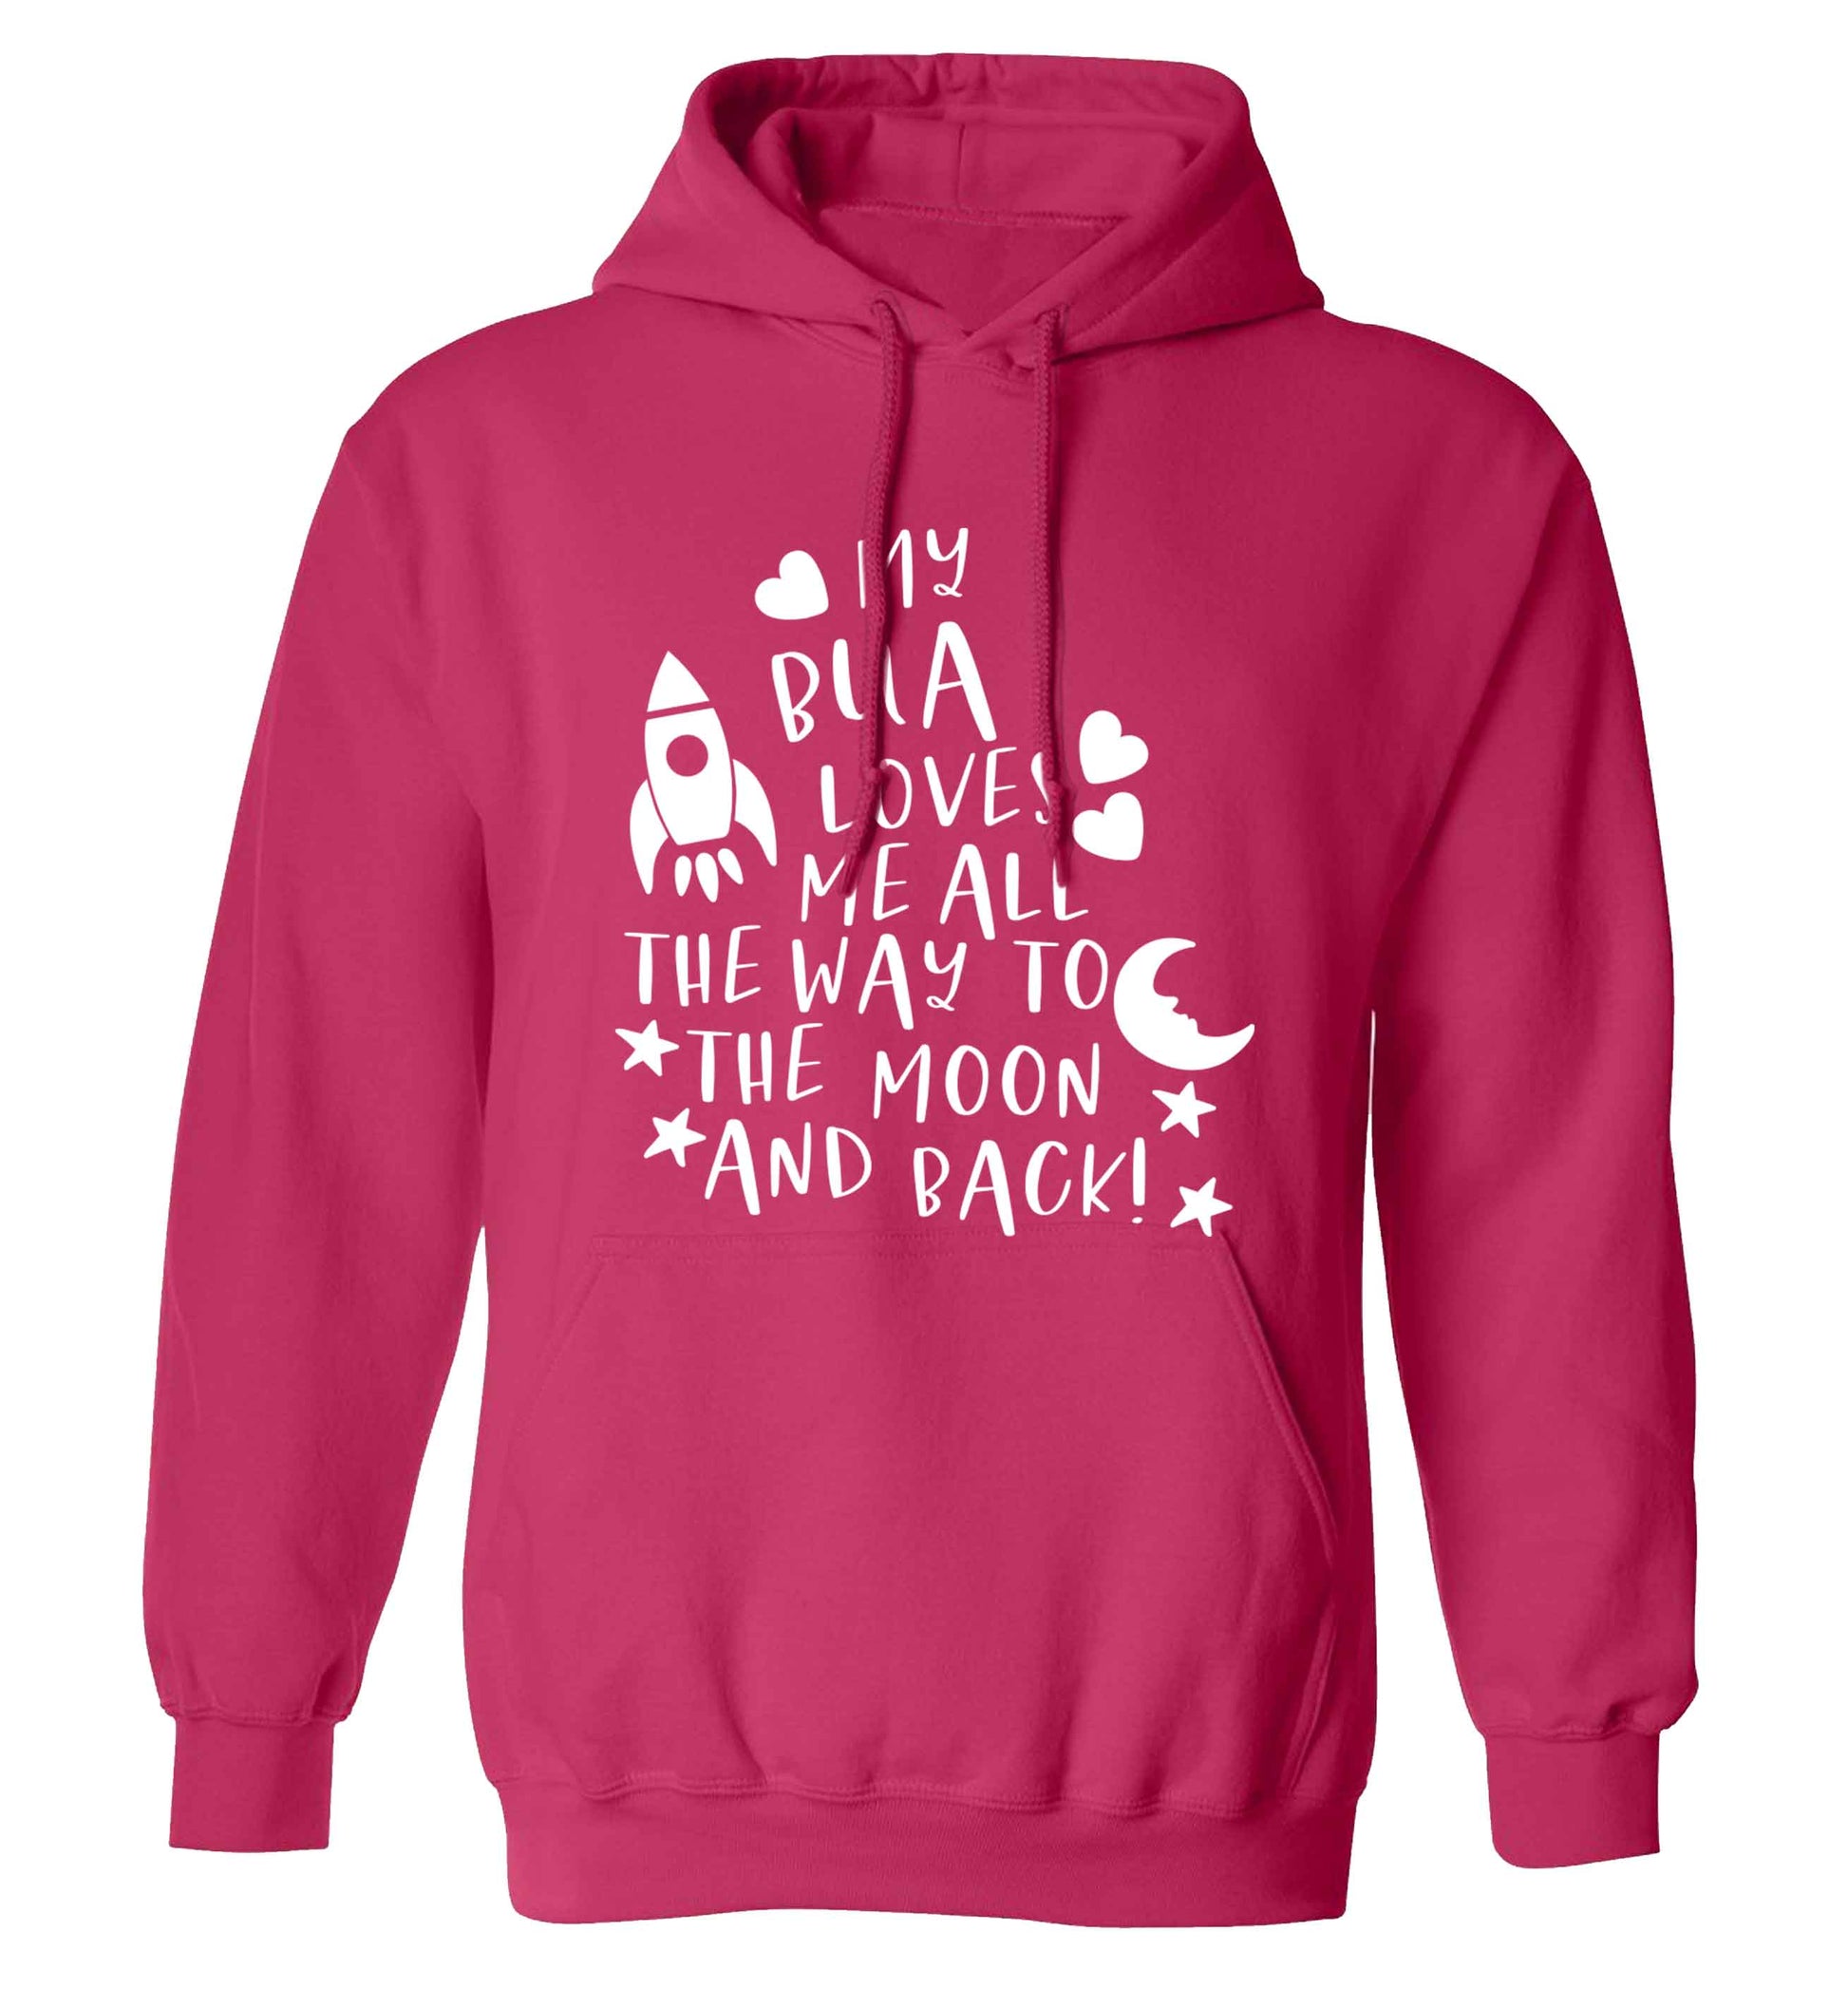 My bua loves me all they way to the moon and back adults unisex pink hoodie 2XL